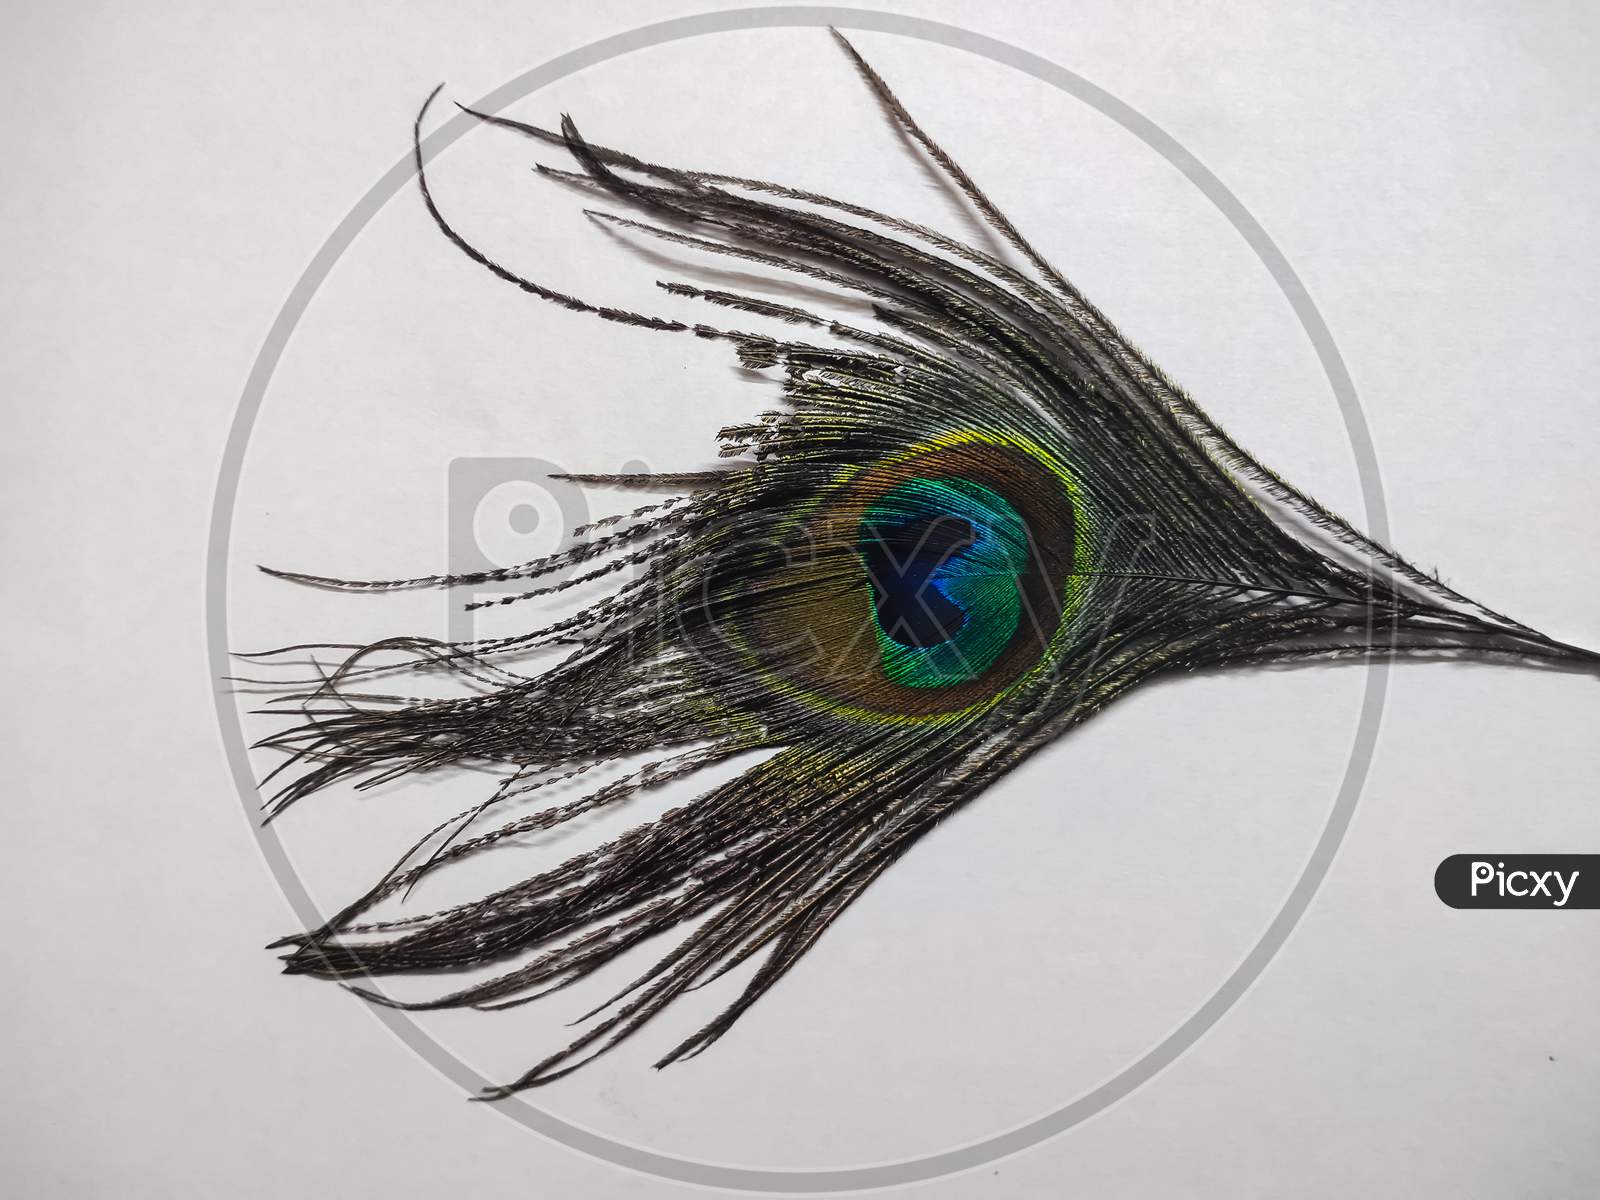 How To Draw A Peacock Feather  Peacock Feather Drawing  Pencil Drawing   YouTube  Feather drawing Peacock feather drawing Peacock wall art